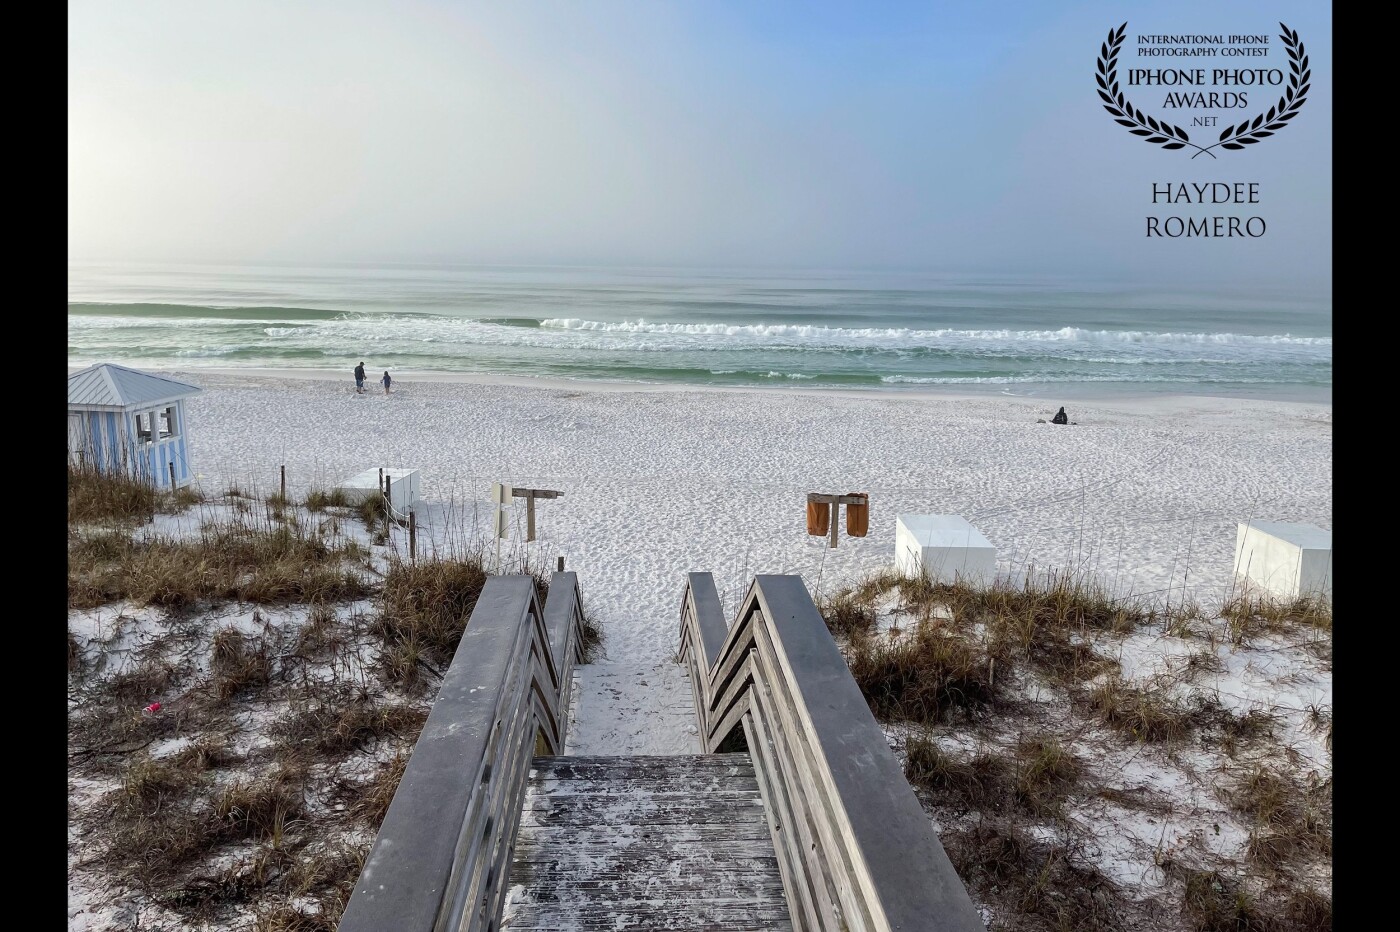 These wooden steps take beachgoers over the sand dunes onto the white sand beach of Destin on Florida's Emerald Coast, named after the emerald green waters of this part of the Gulf of Mexico.